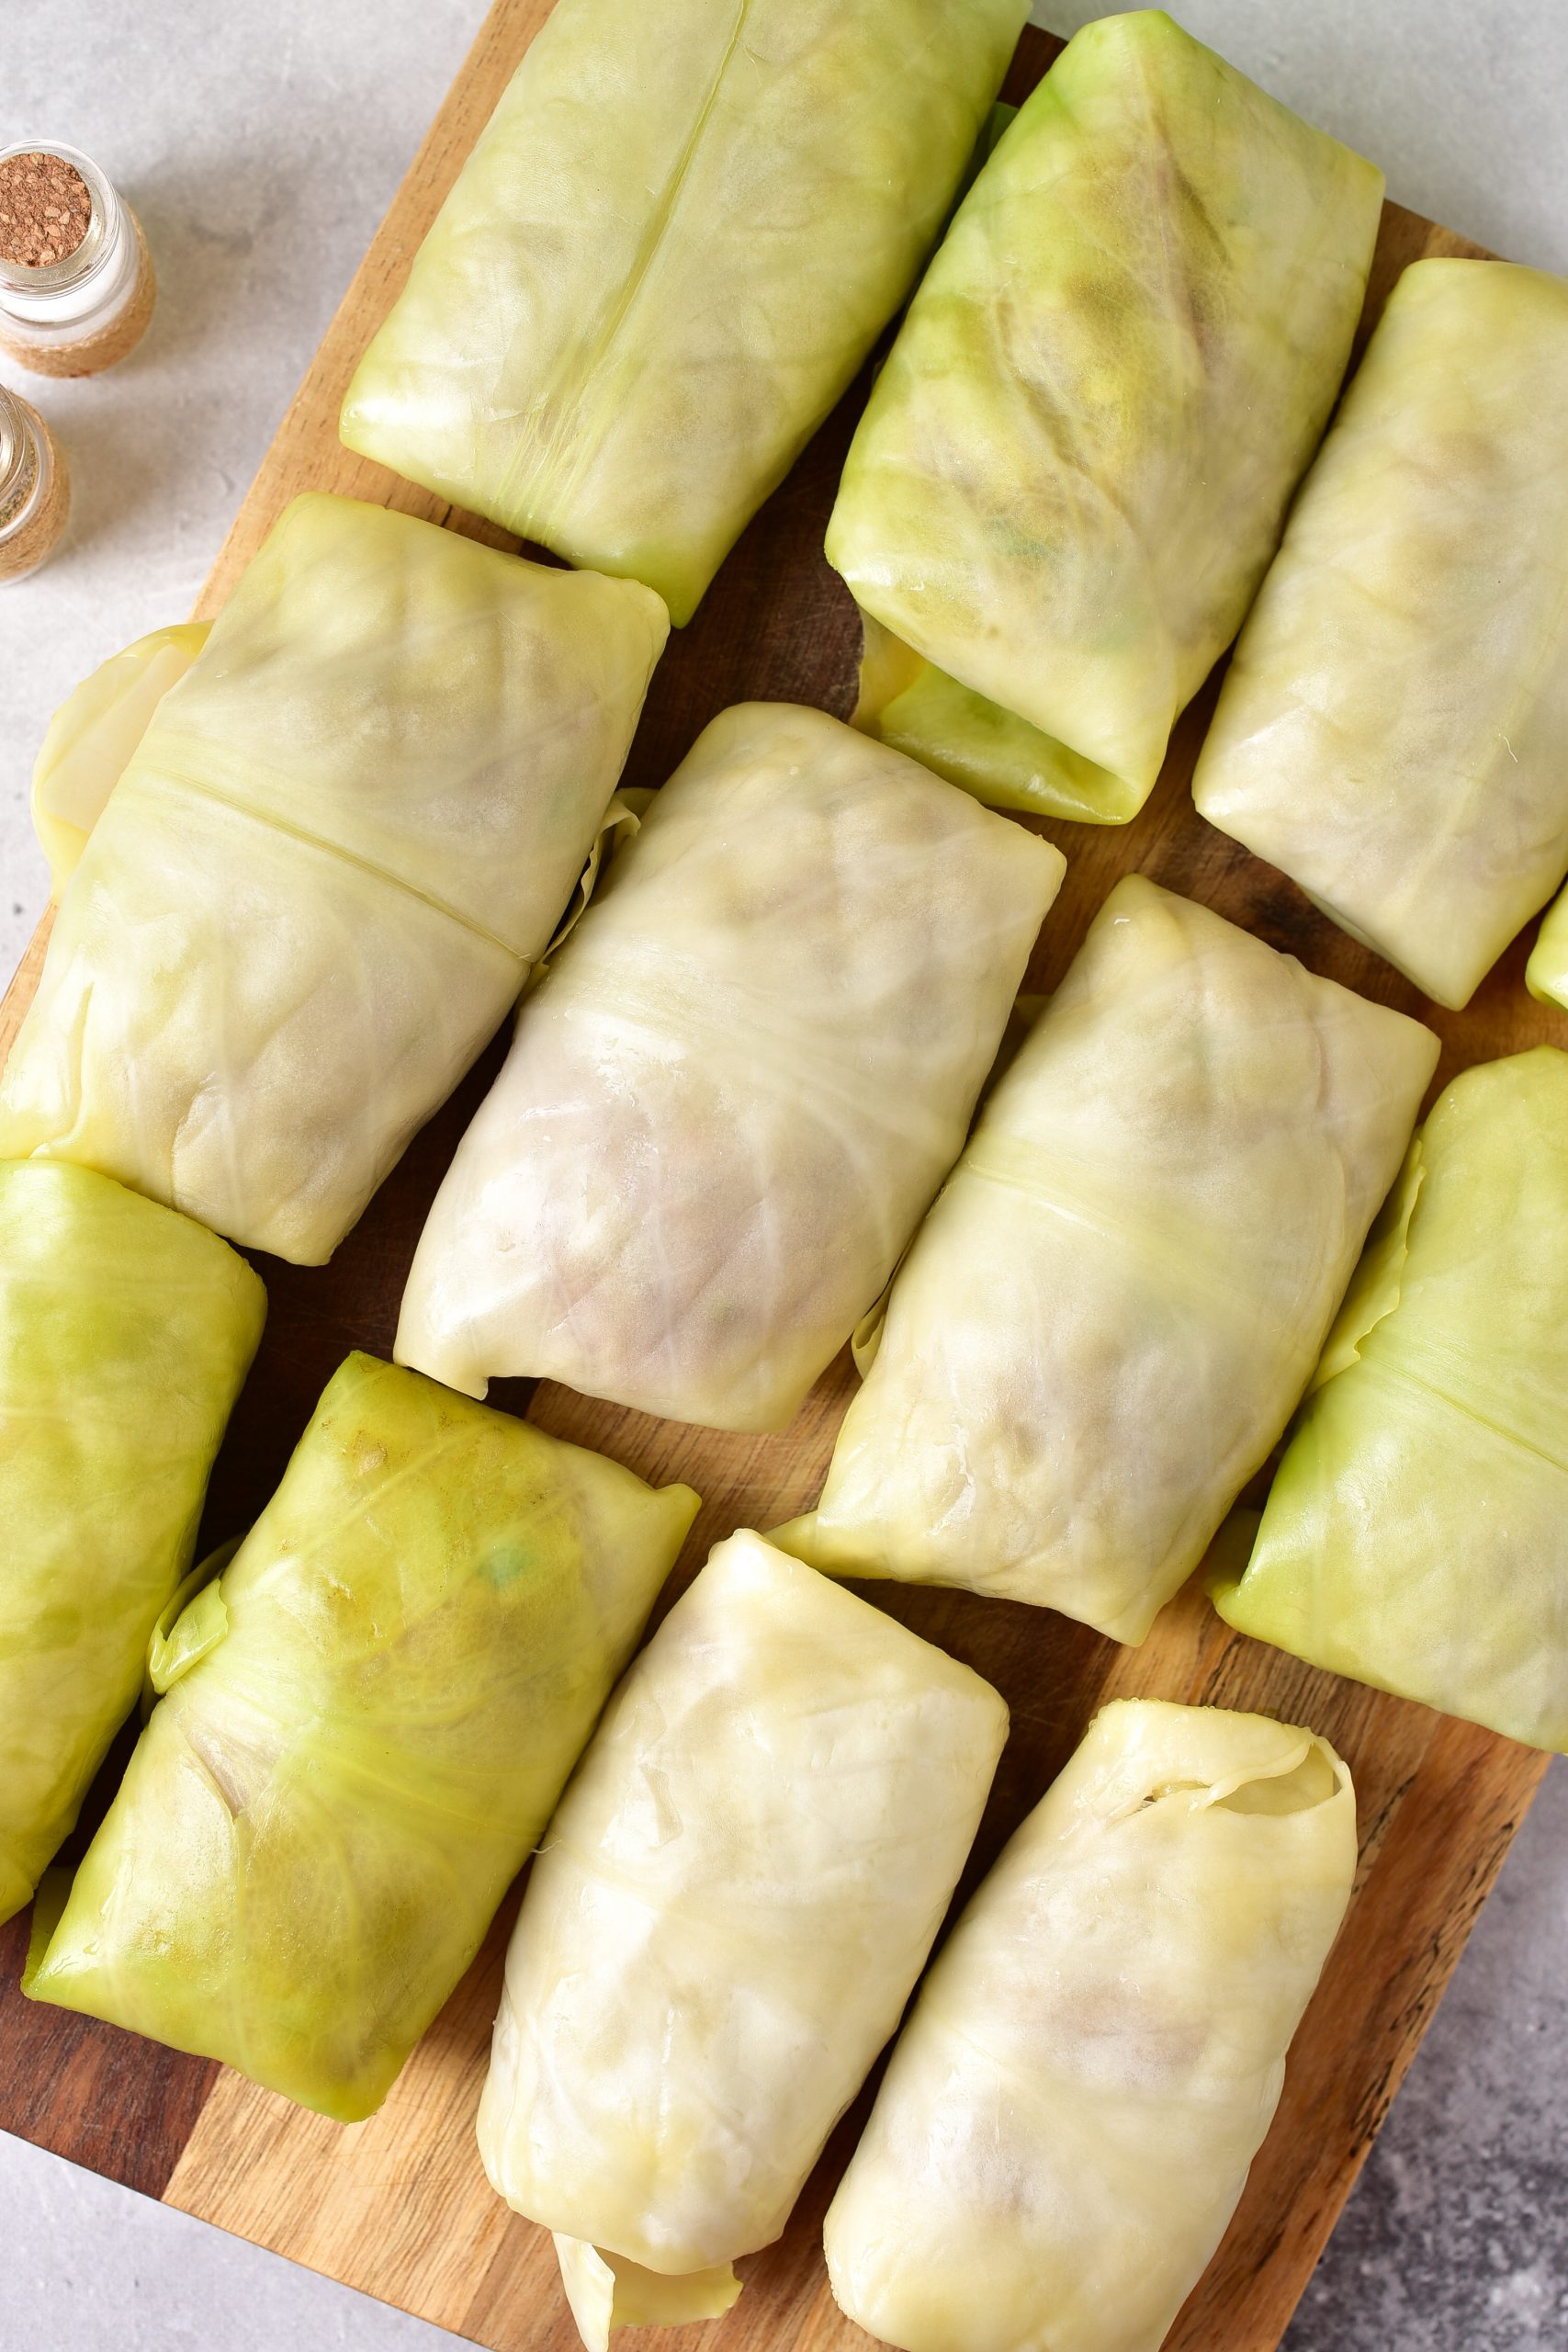 Roll the cabbage leaves around the filling to form a wrapped burrito shape. 